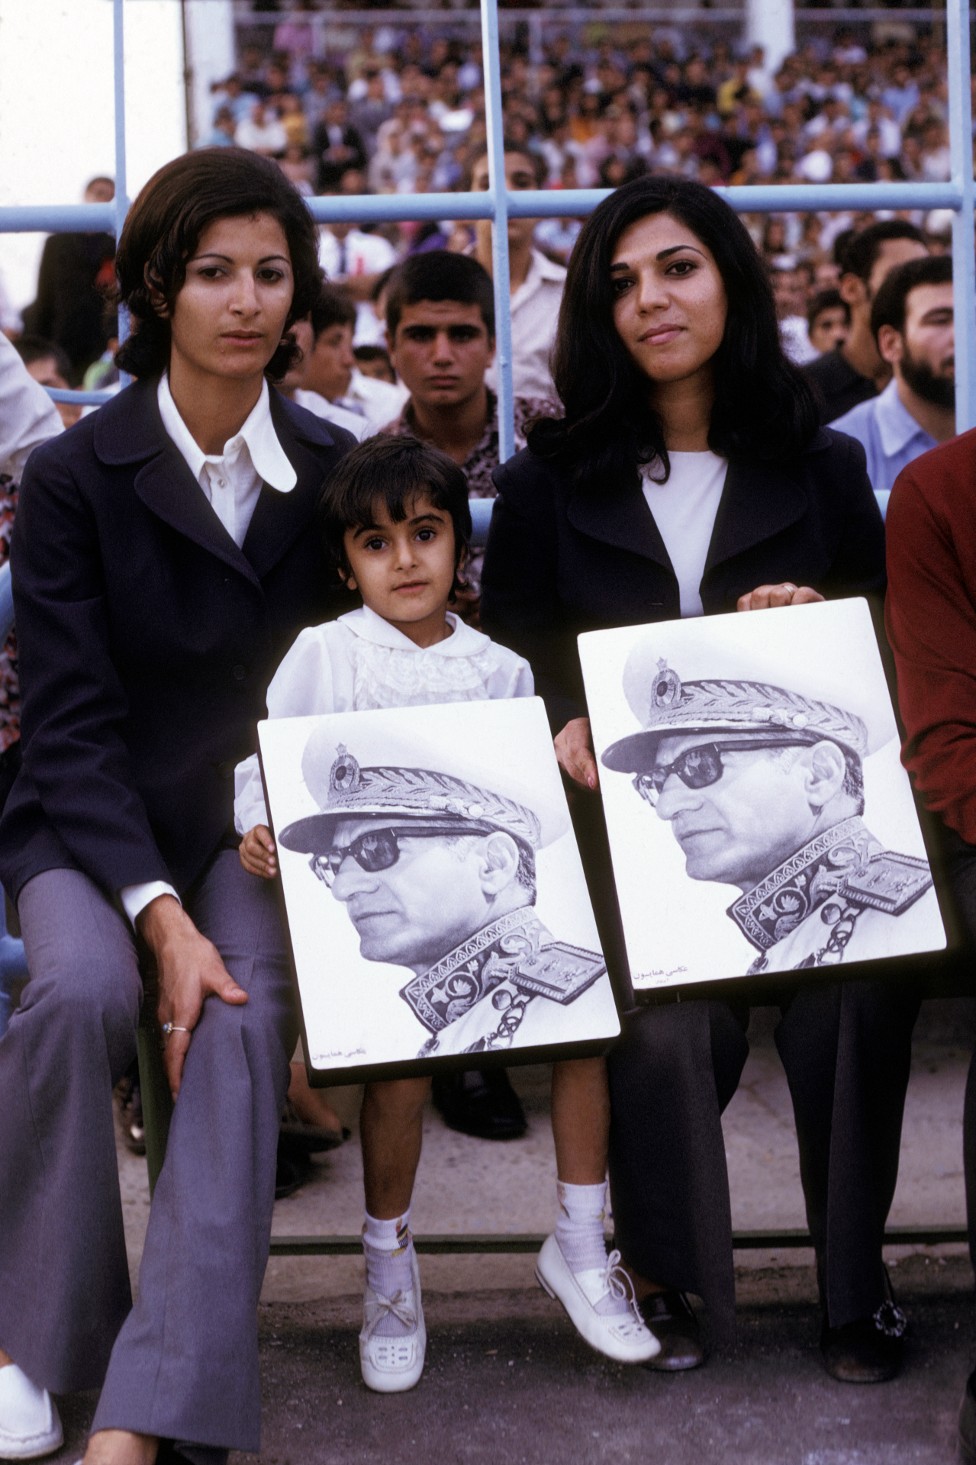 Attendees at a celebration of the birthday of the Shah of Iran in a stadium in the 1970s